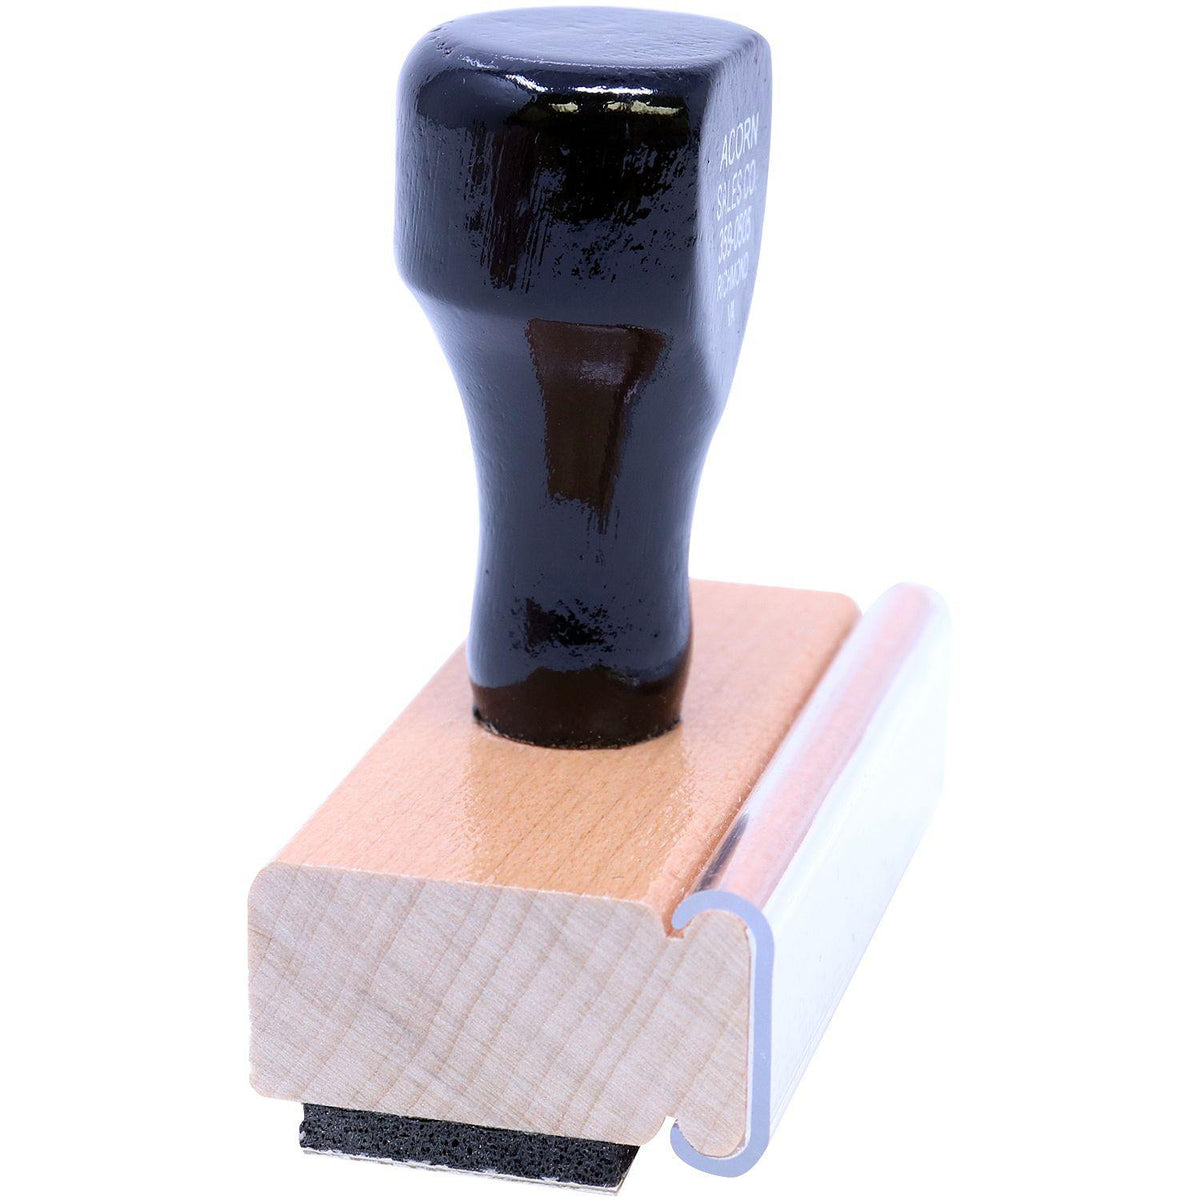 Side View of Large 100 Percent Rubber Stamp at an Angle